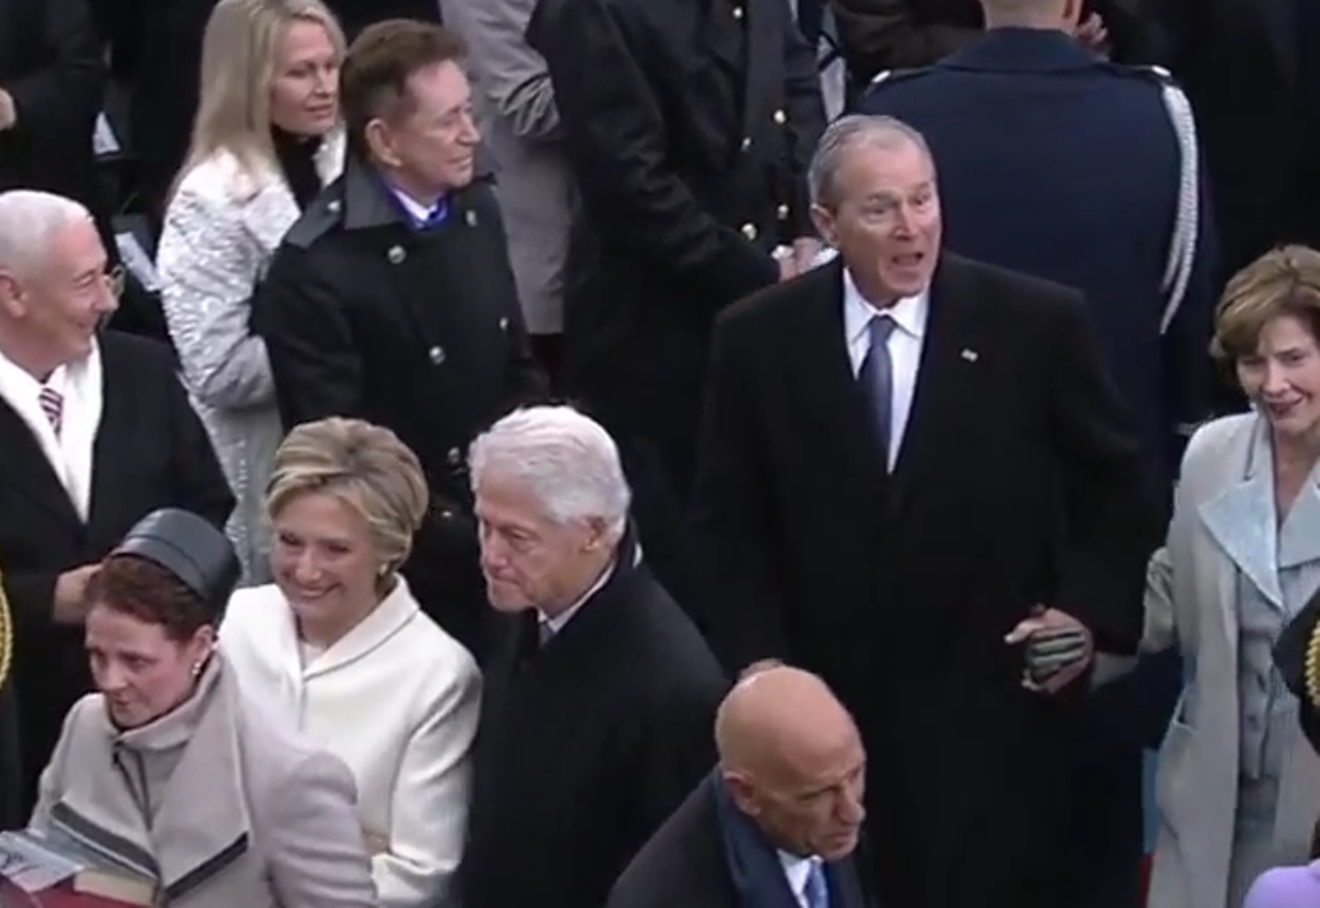 George and Laura Bush at the inauguration of Donald Trump